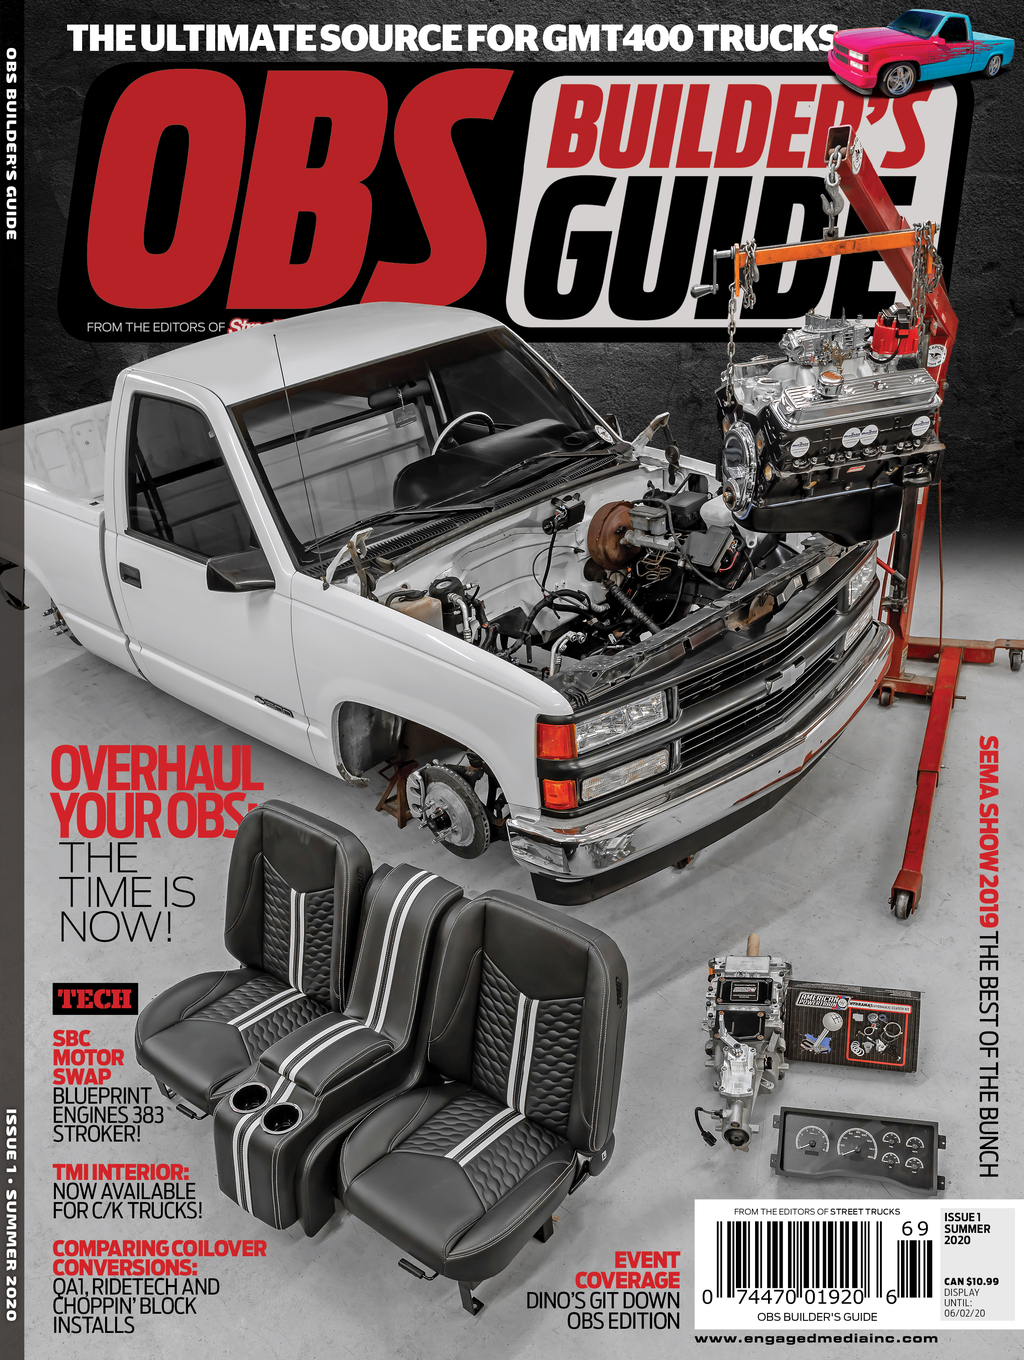 Preorder Now OBS Builders Guide Motortopia EVERYTHING Automotive!